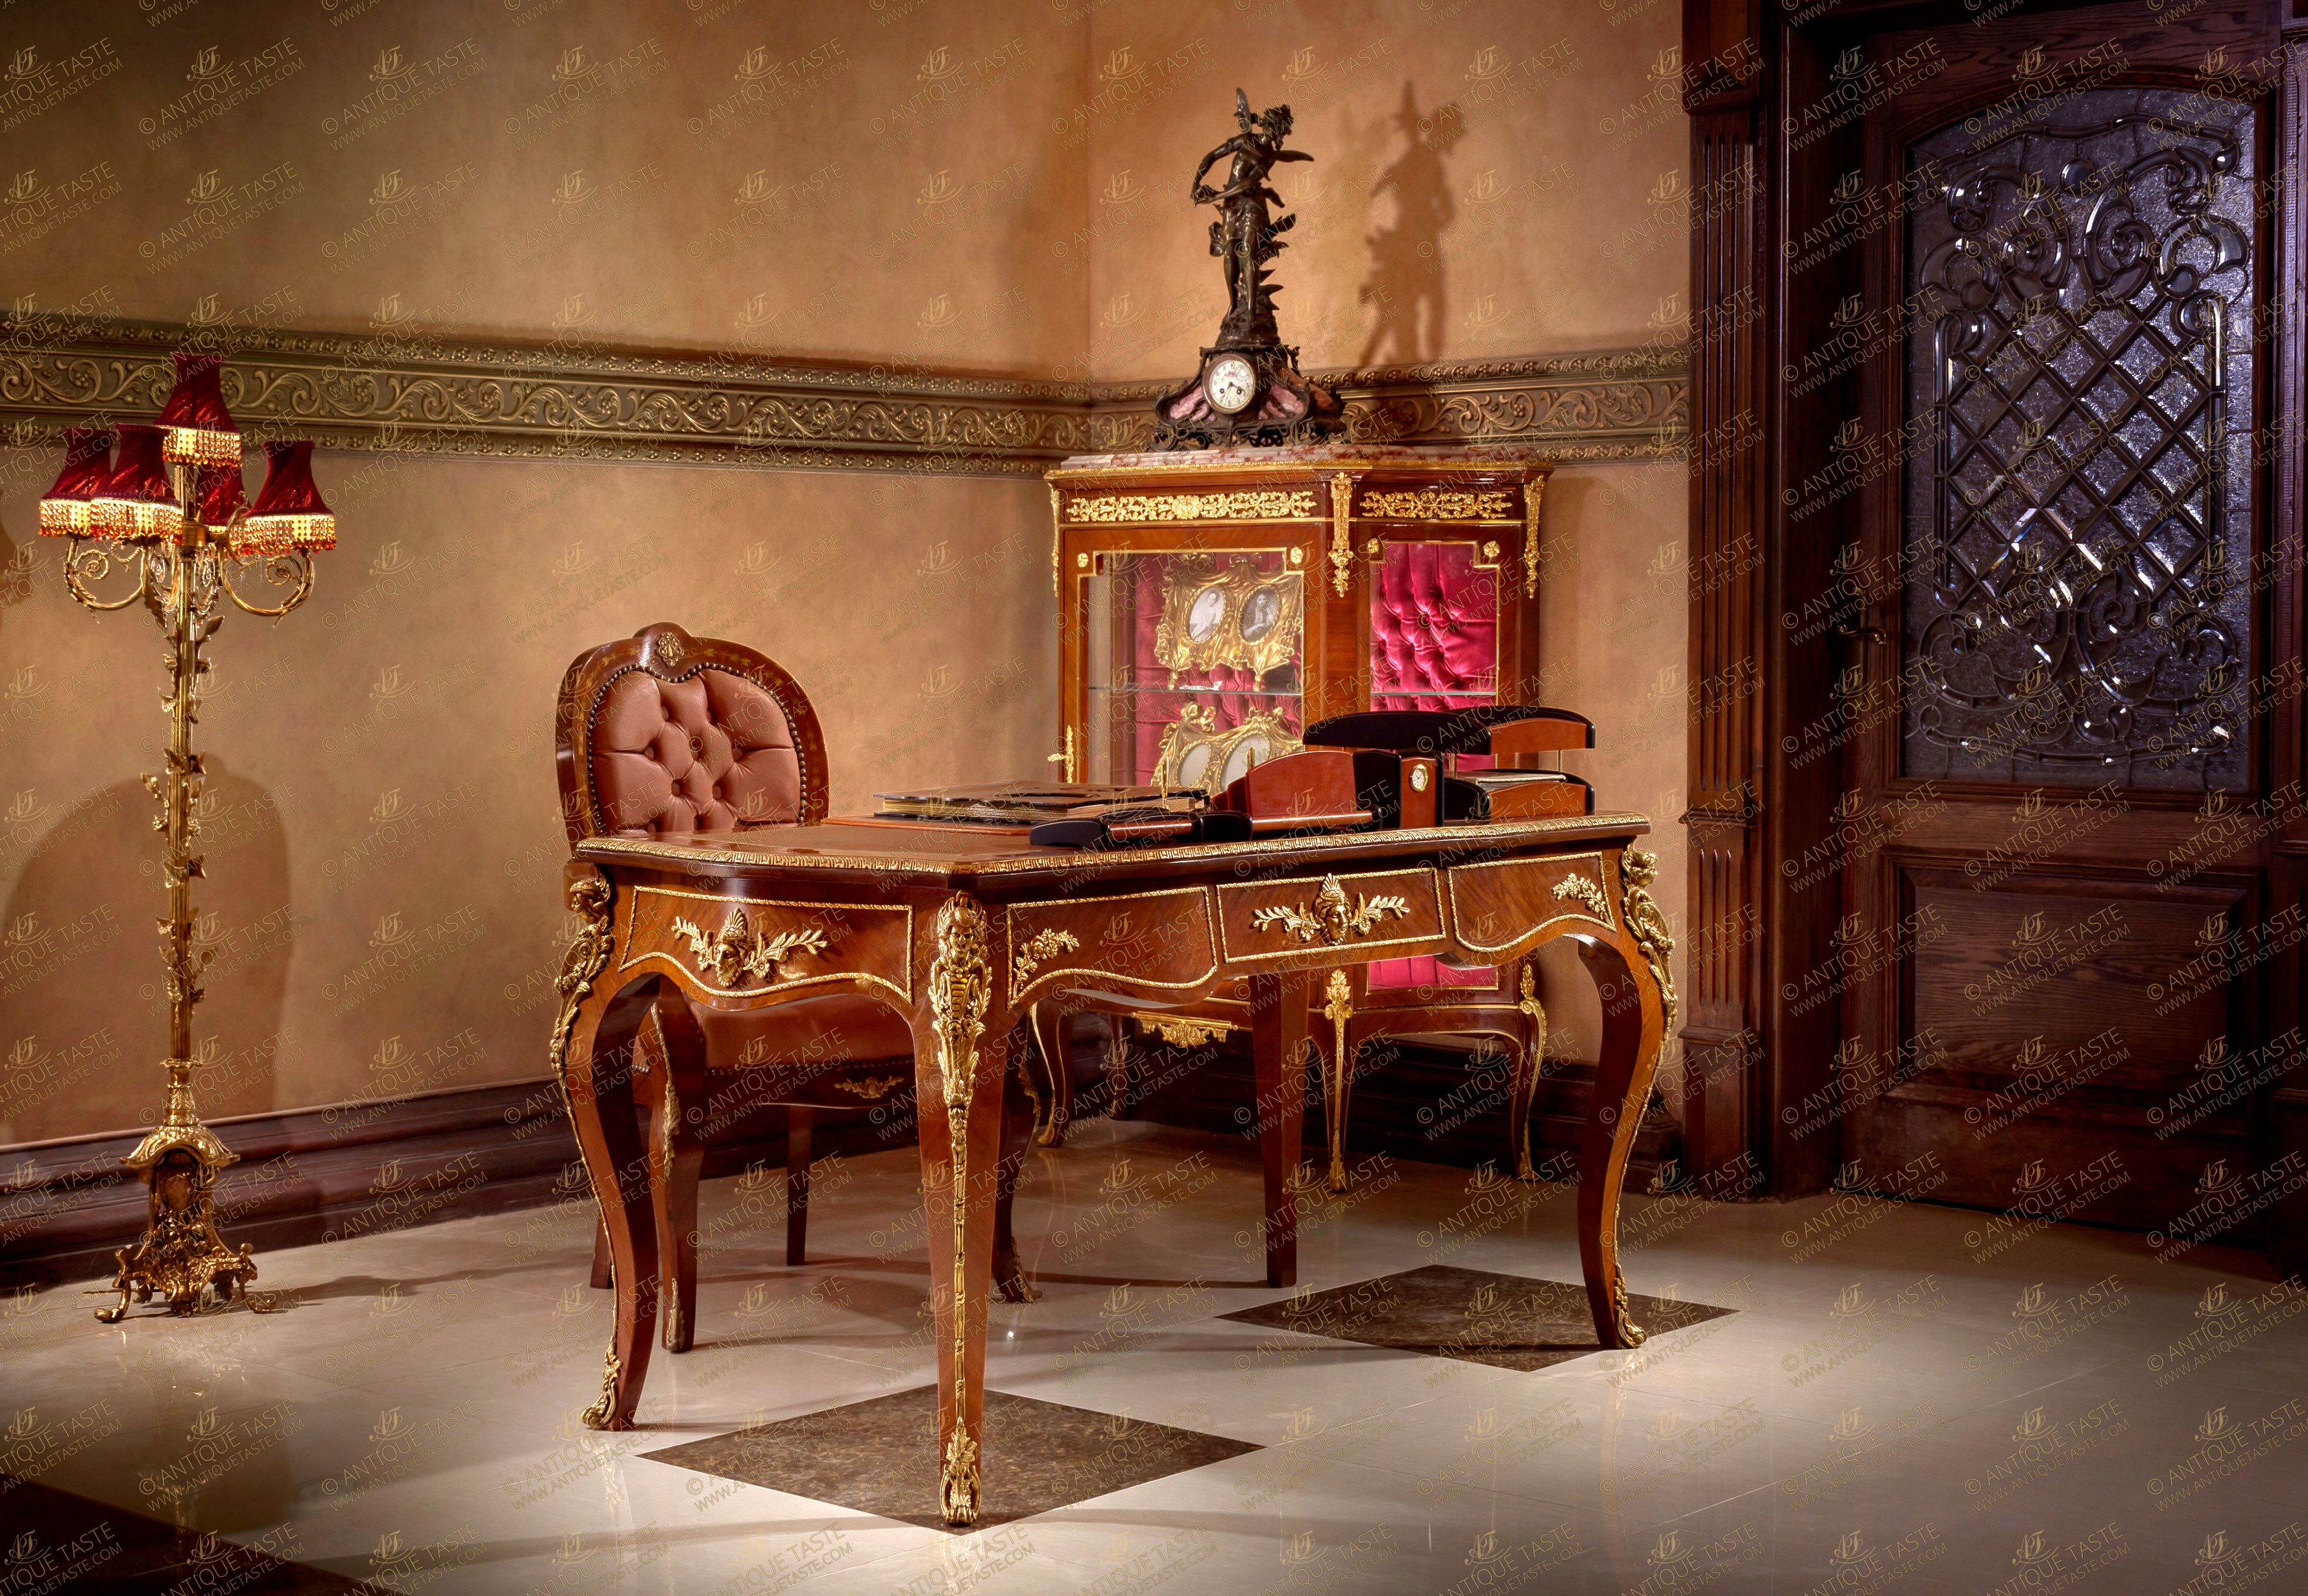 French 18th century Louis XV style ormolu-mounted desk after the model by Bernard Ebeniste